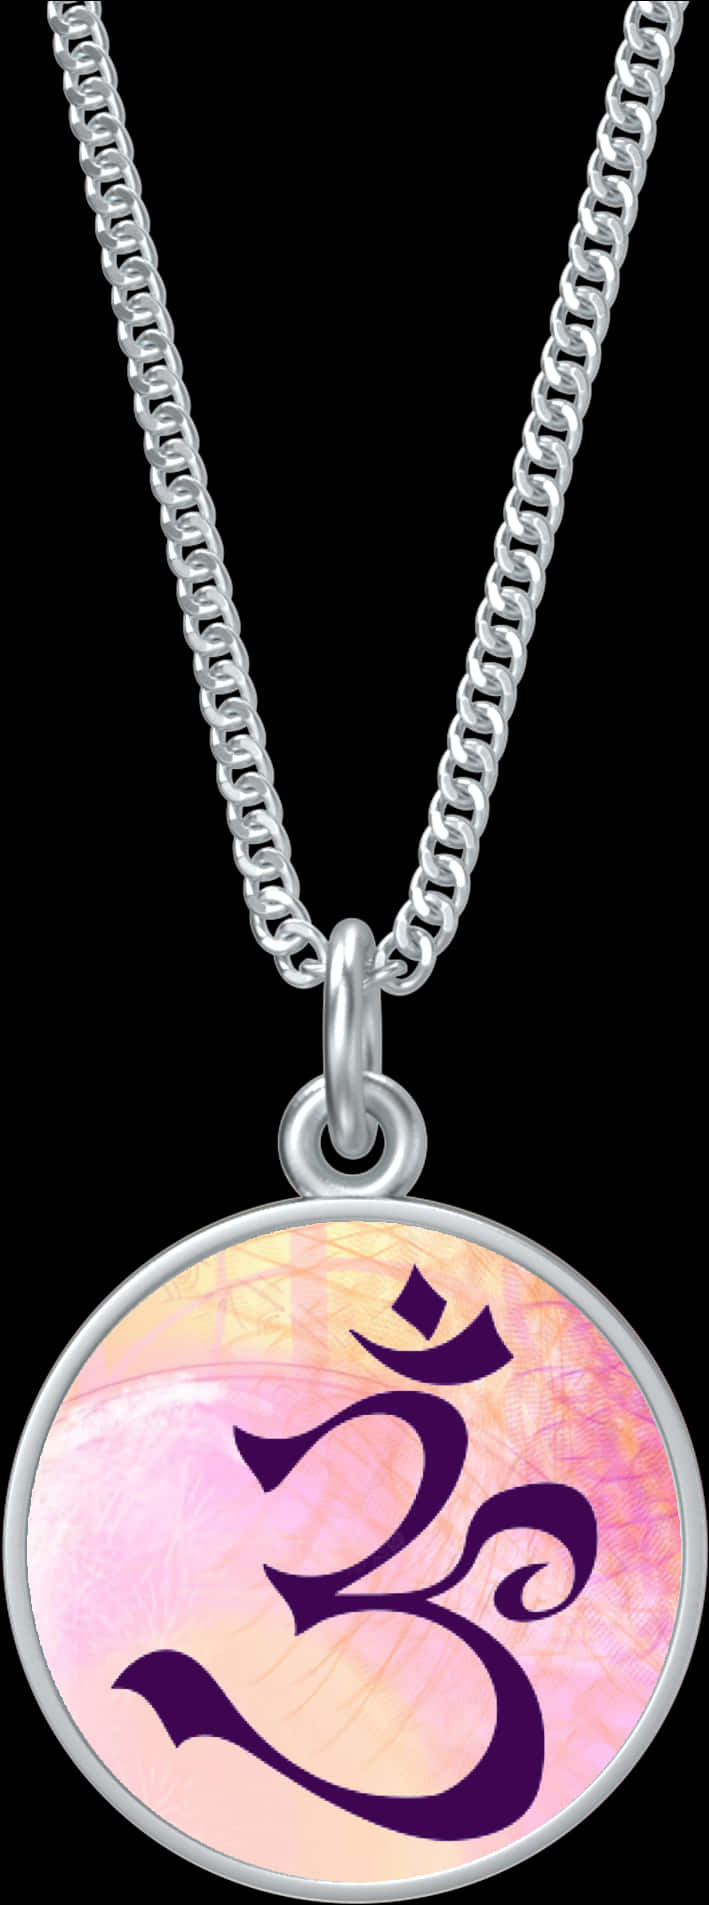 A Silver Chain With A Round Pendant